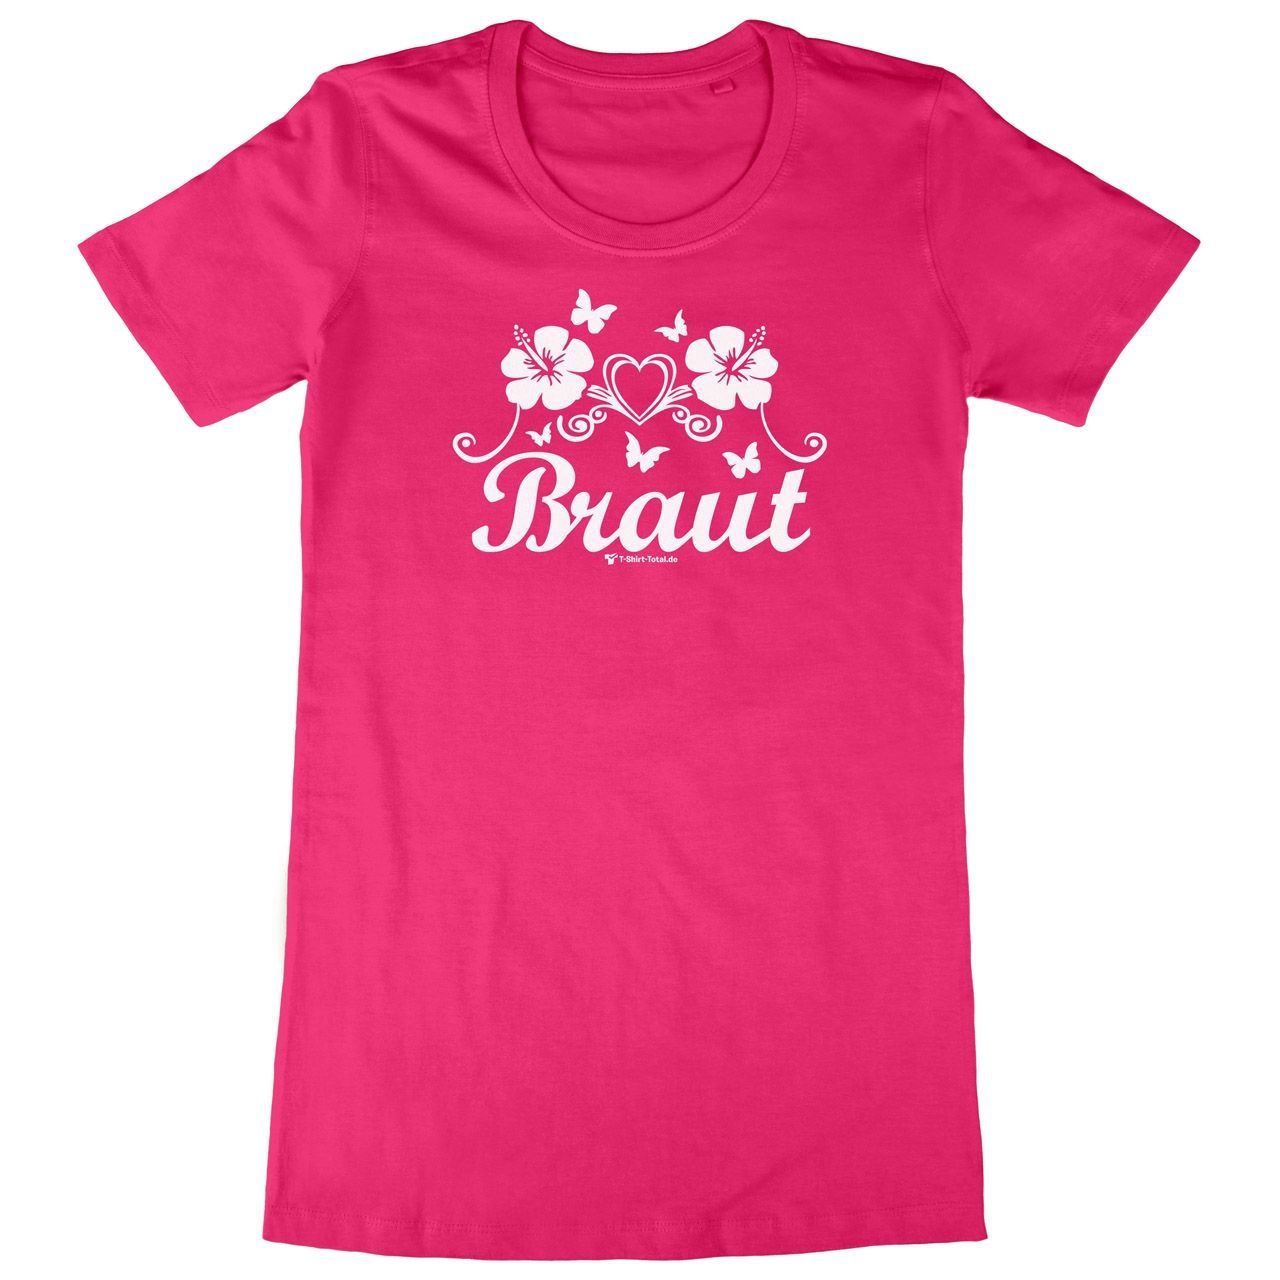 Die Braut Woman Long Shirt pink Extra Small